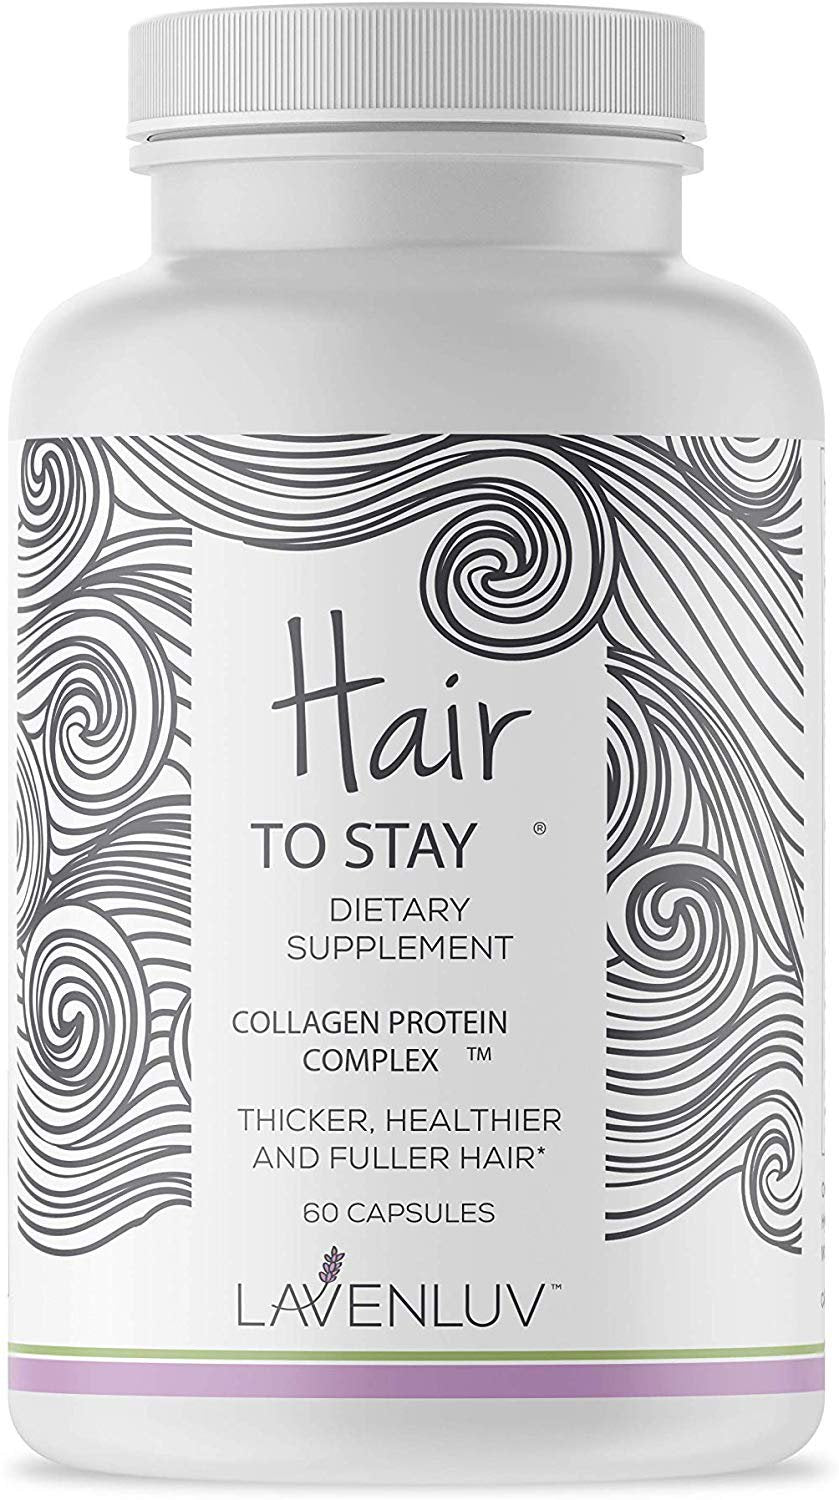 Lavenluv Hair to Stay Kosher Collagen Protein, Biotin and Vitamins Complex for Thicker, Healthier and Fuller Hair - Prevents Hair Loss, Treats Thinning, Dry and Brittle Hair - 60 Capsules